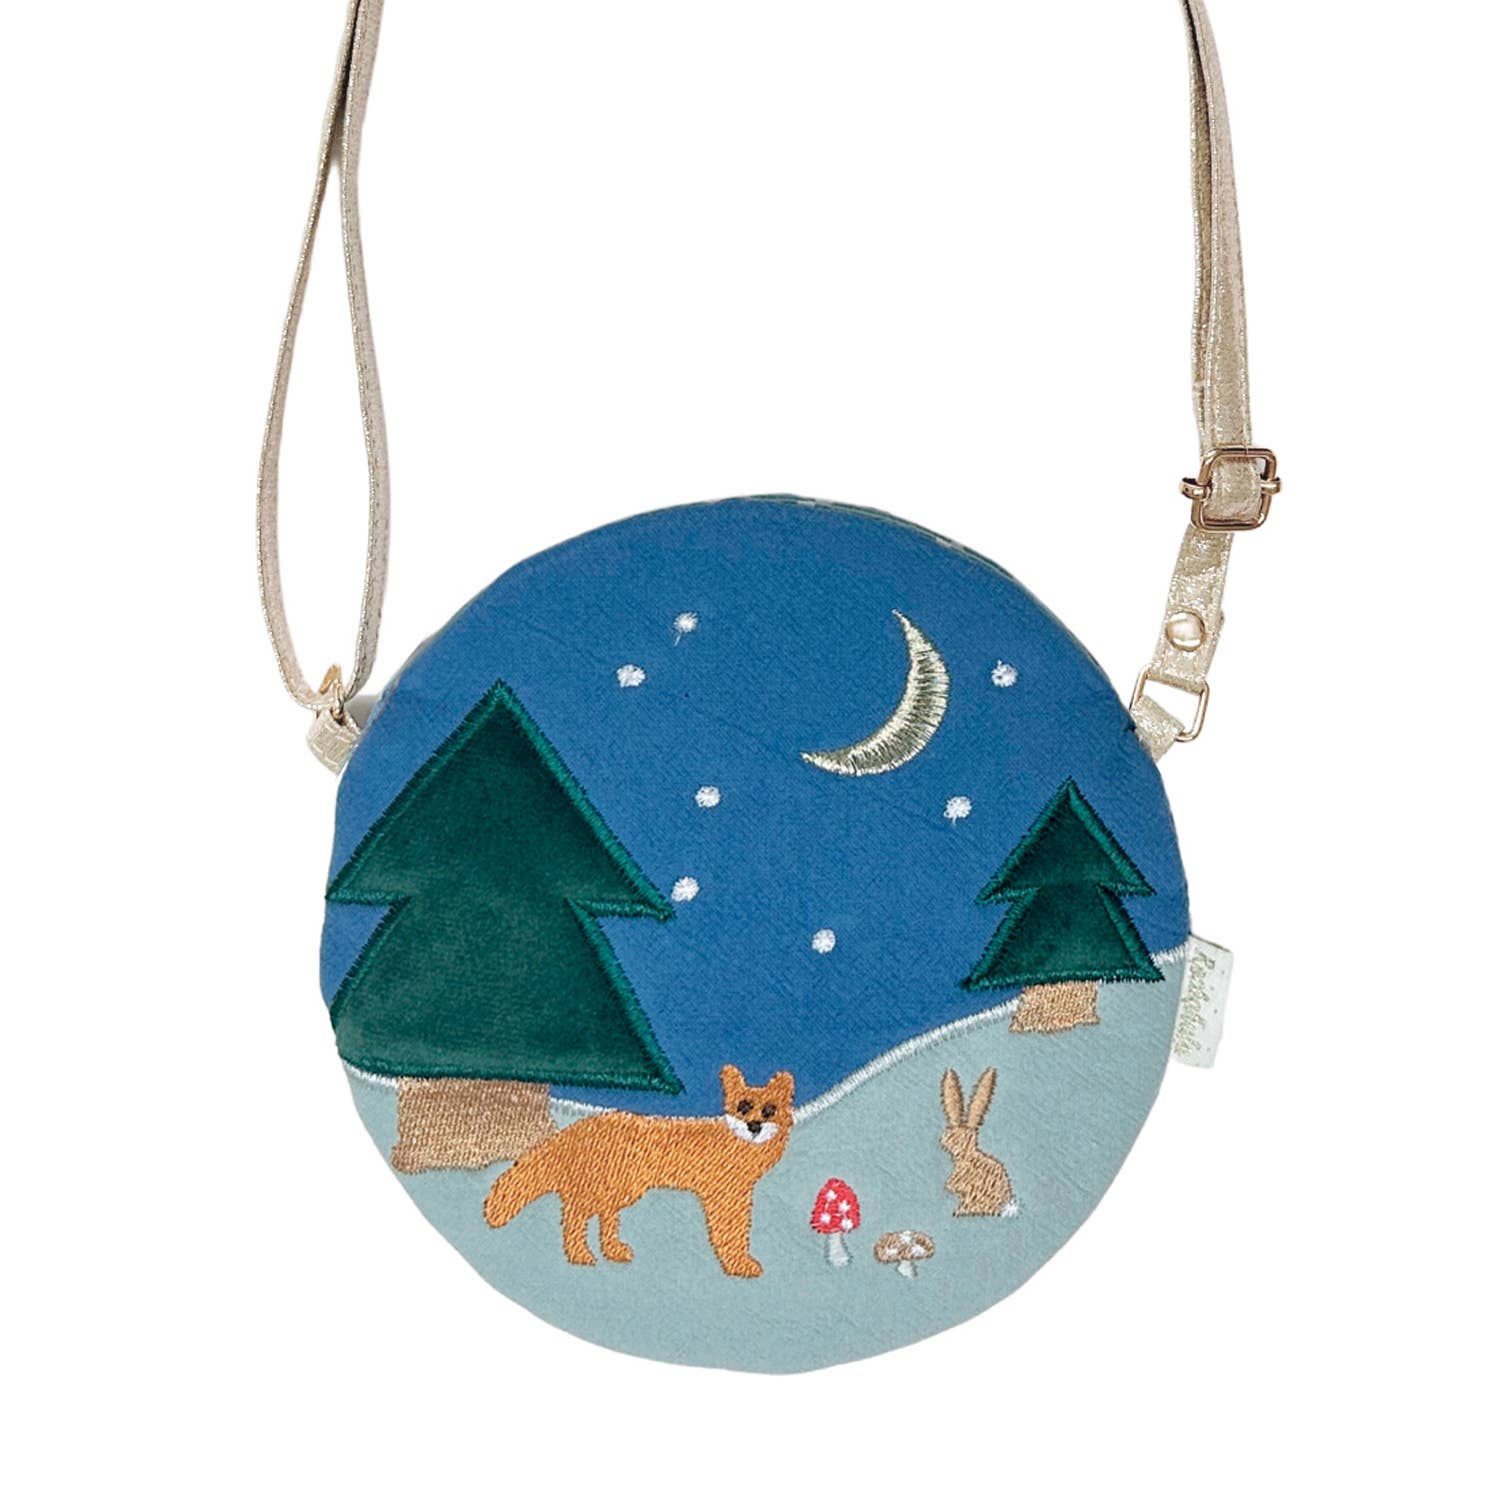 Blue round crossbody bag with embroidered woodland animals and trees